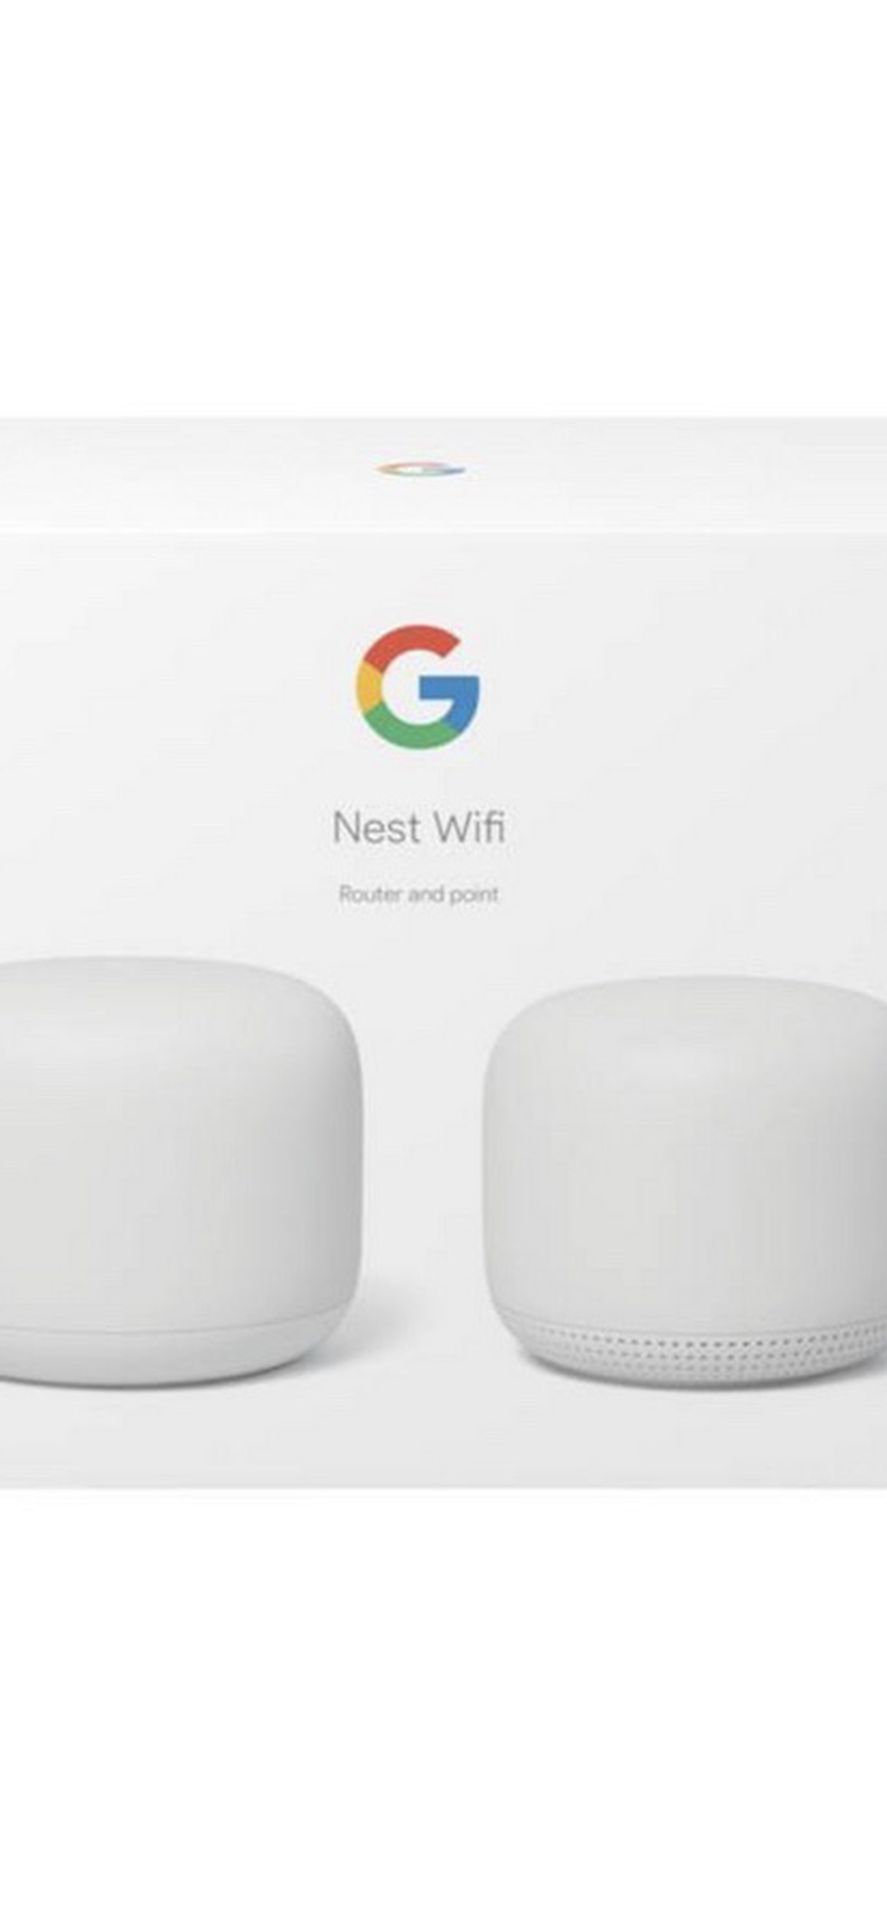 Google Nest Router And Access Point